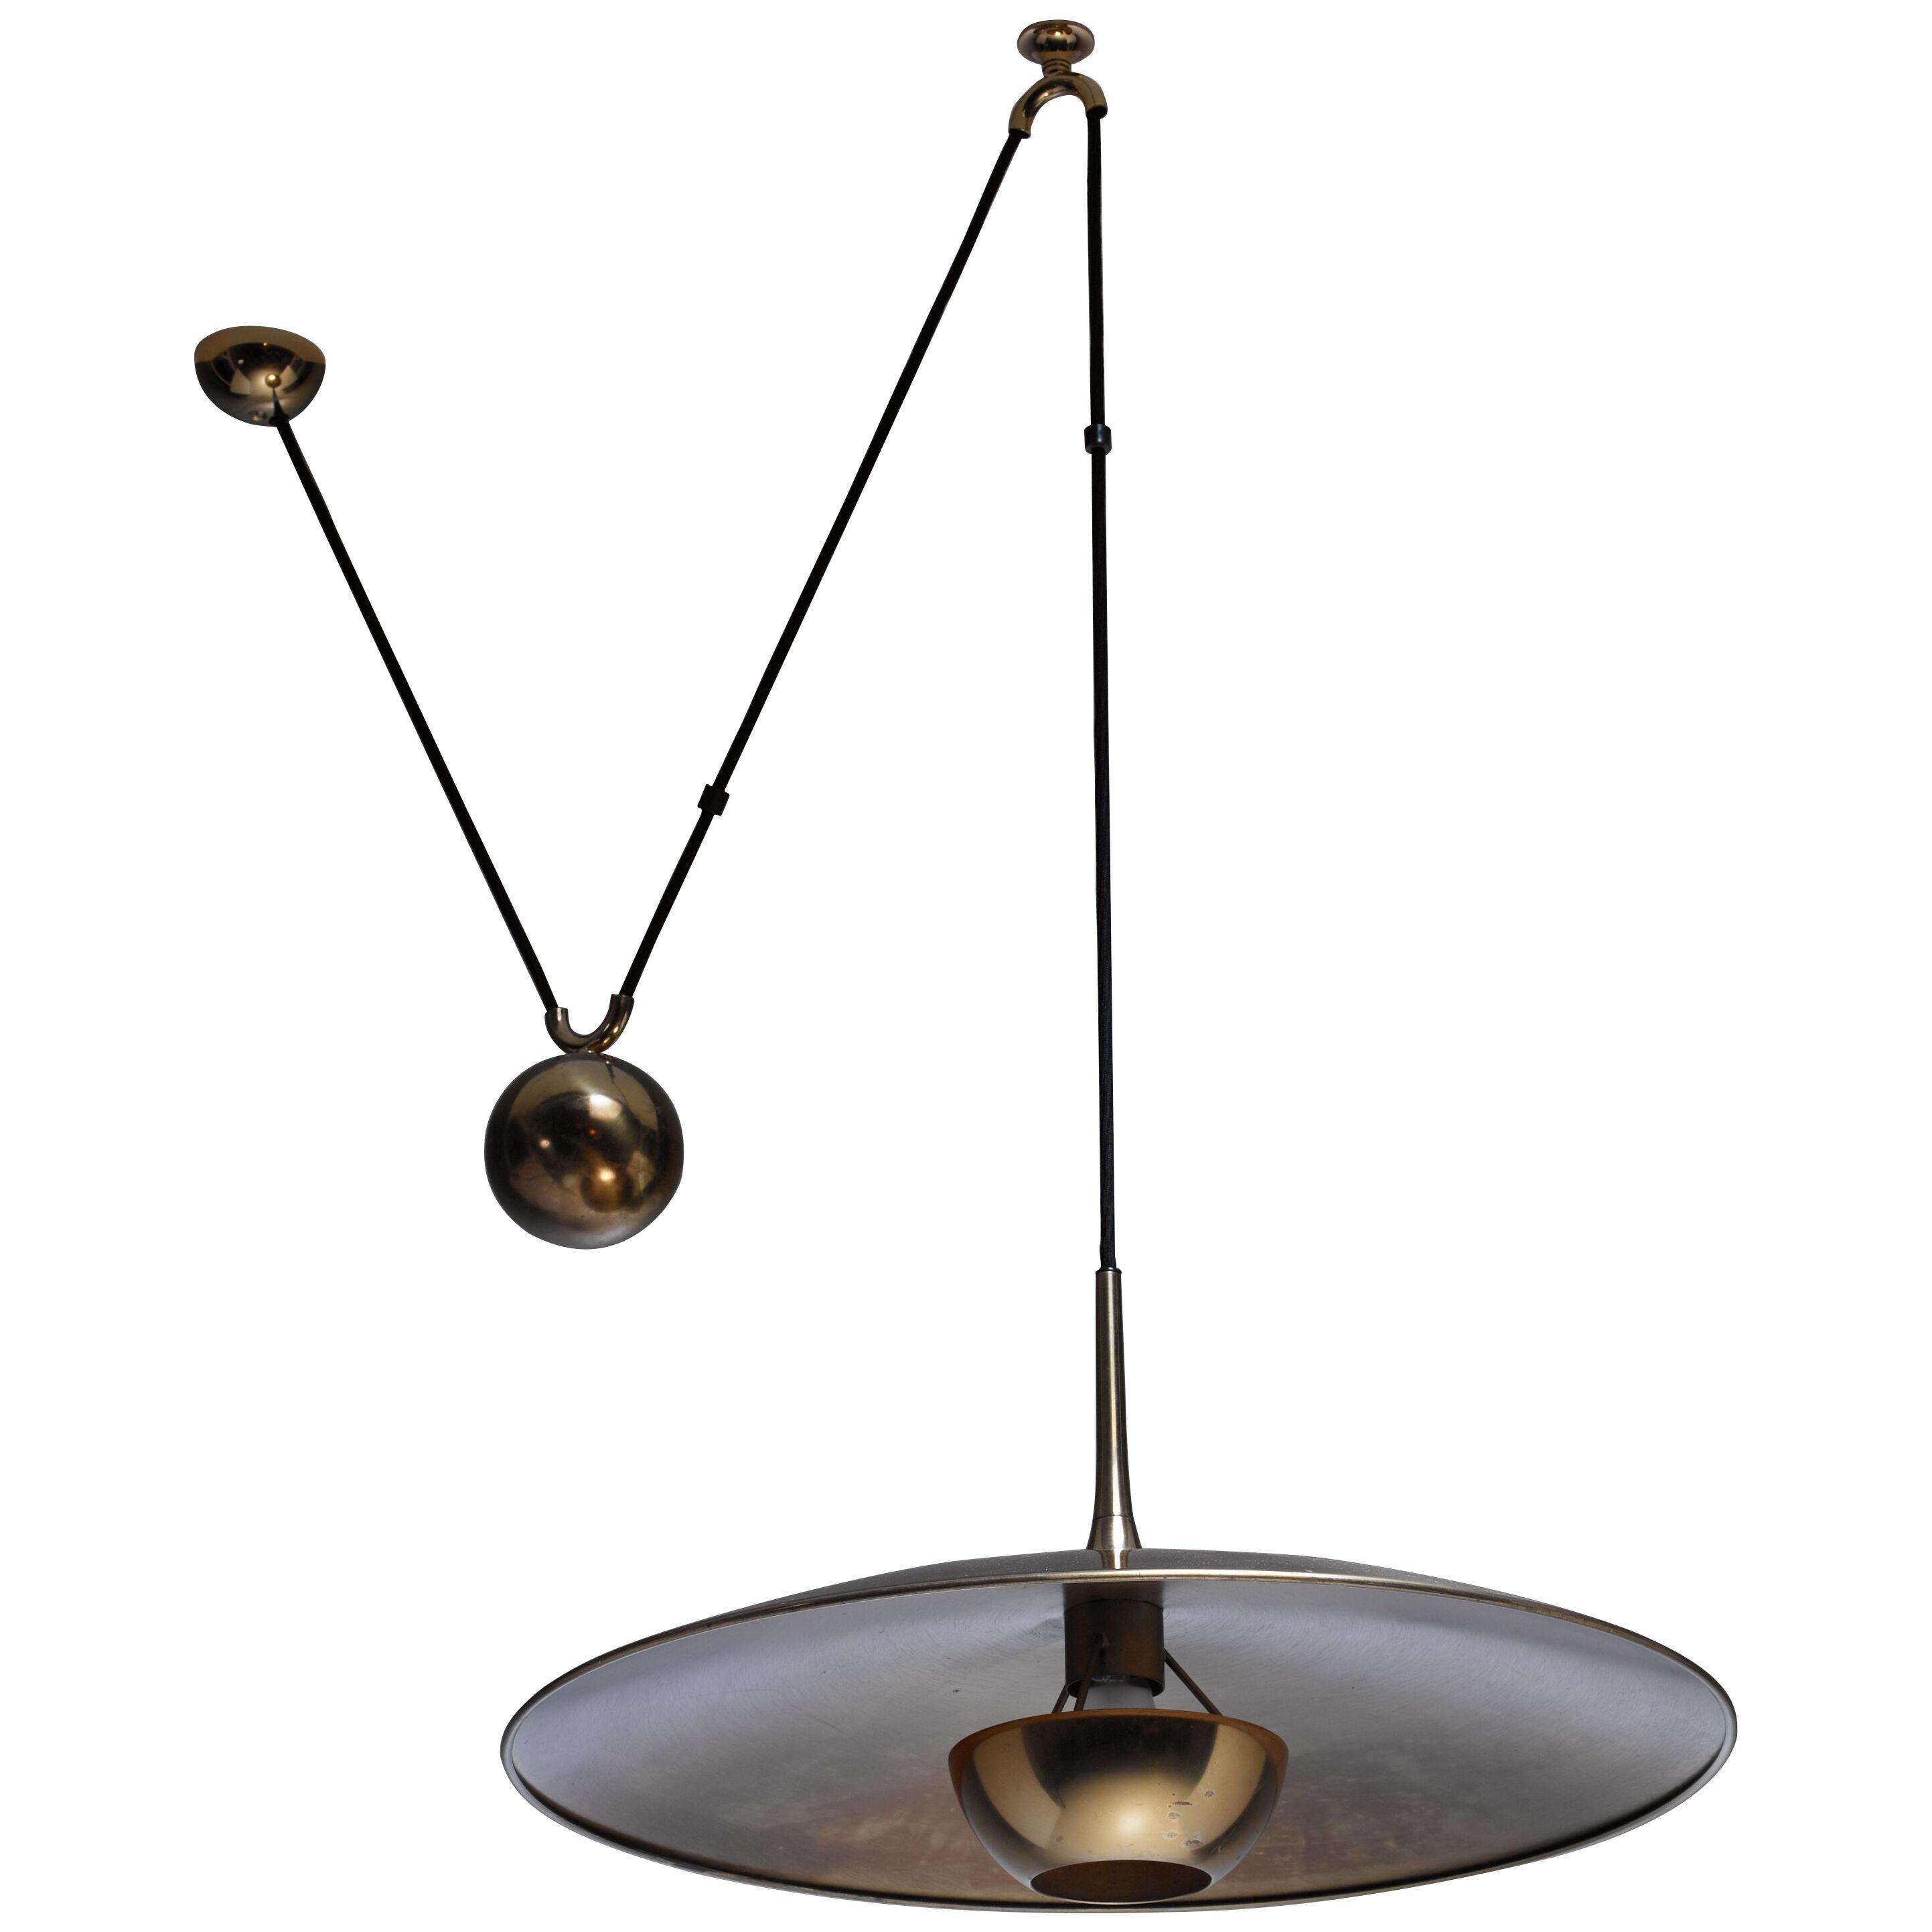 Florian Schulz Brass Onos Pendant with Counterweight, Germany, 1970s